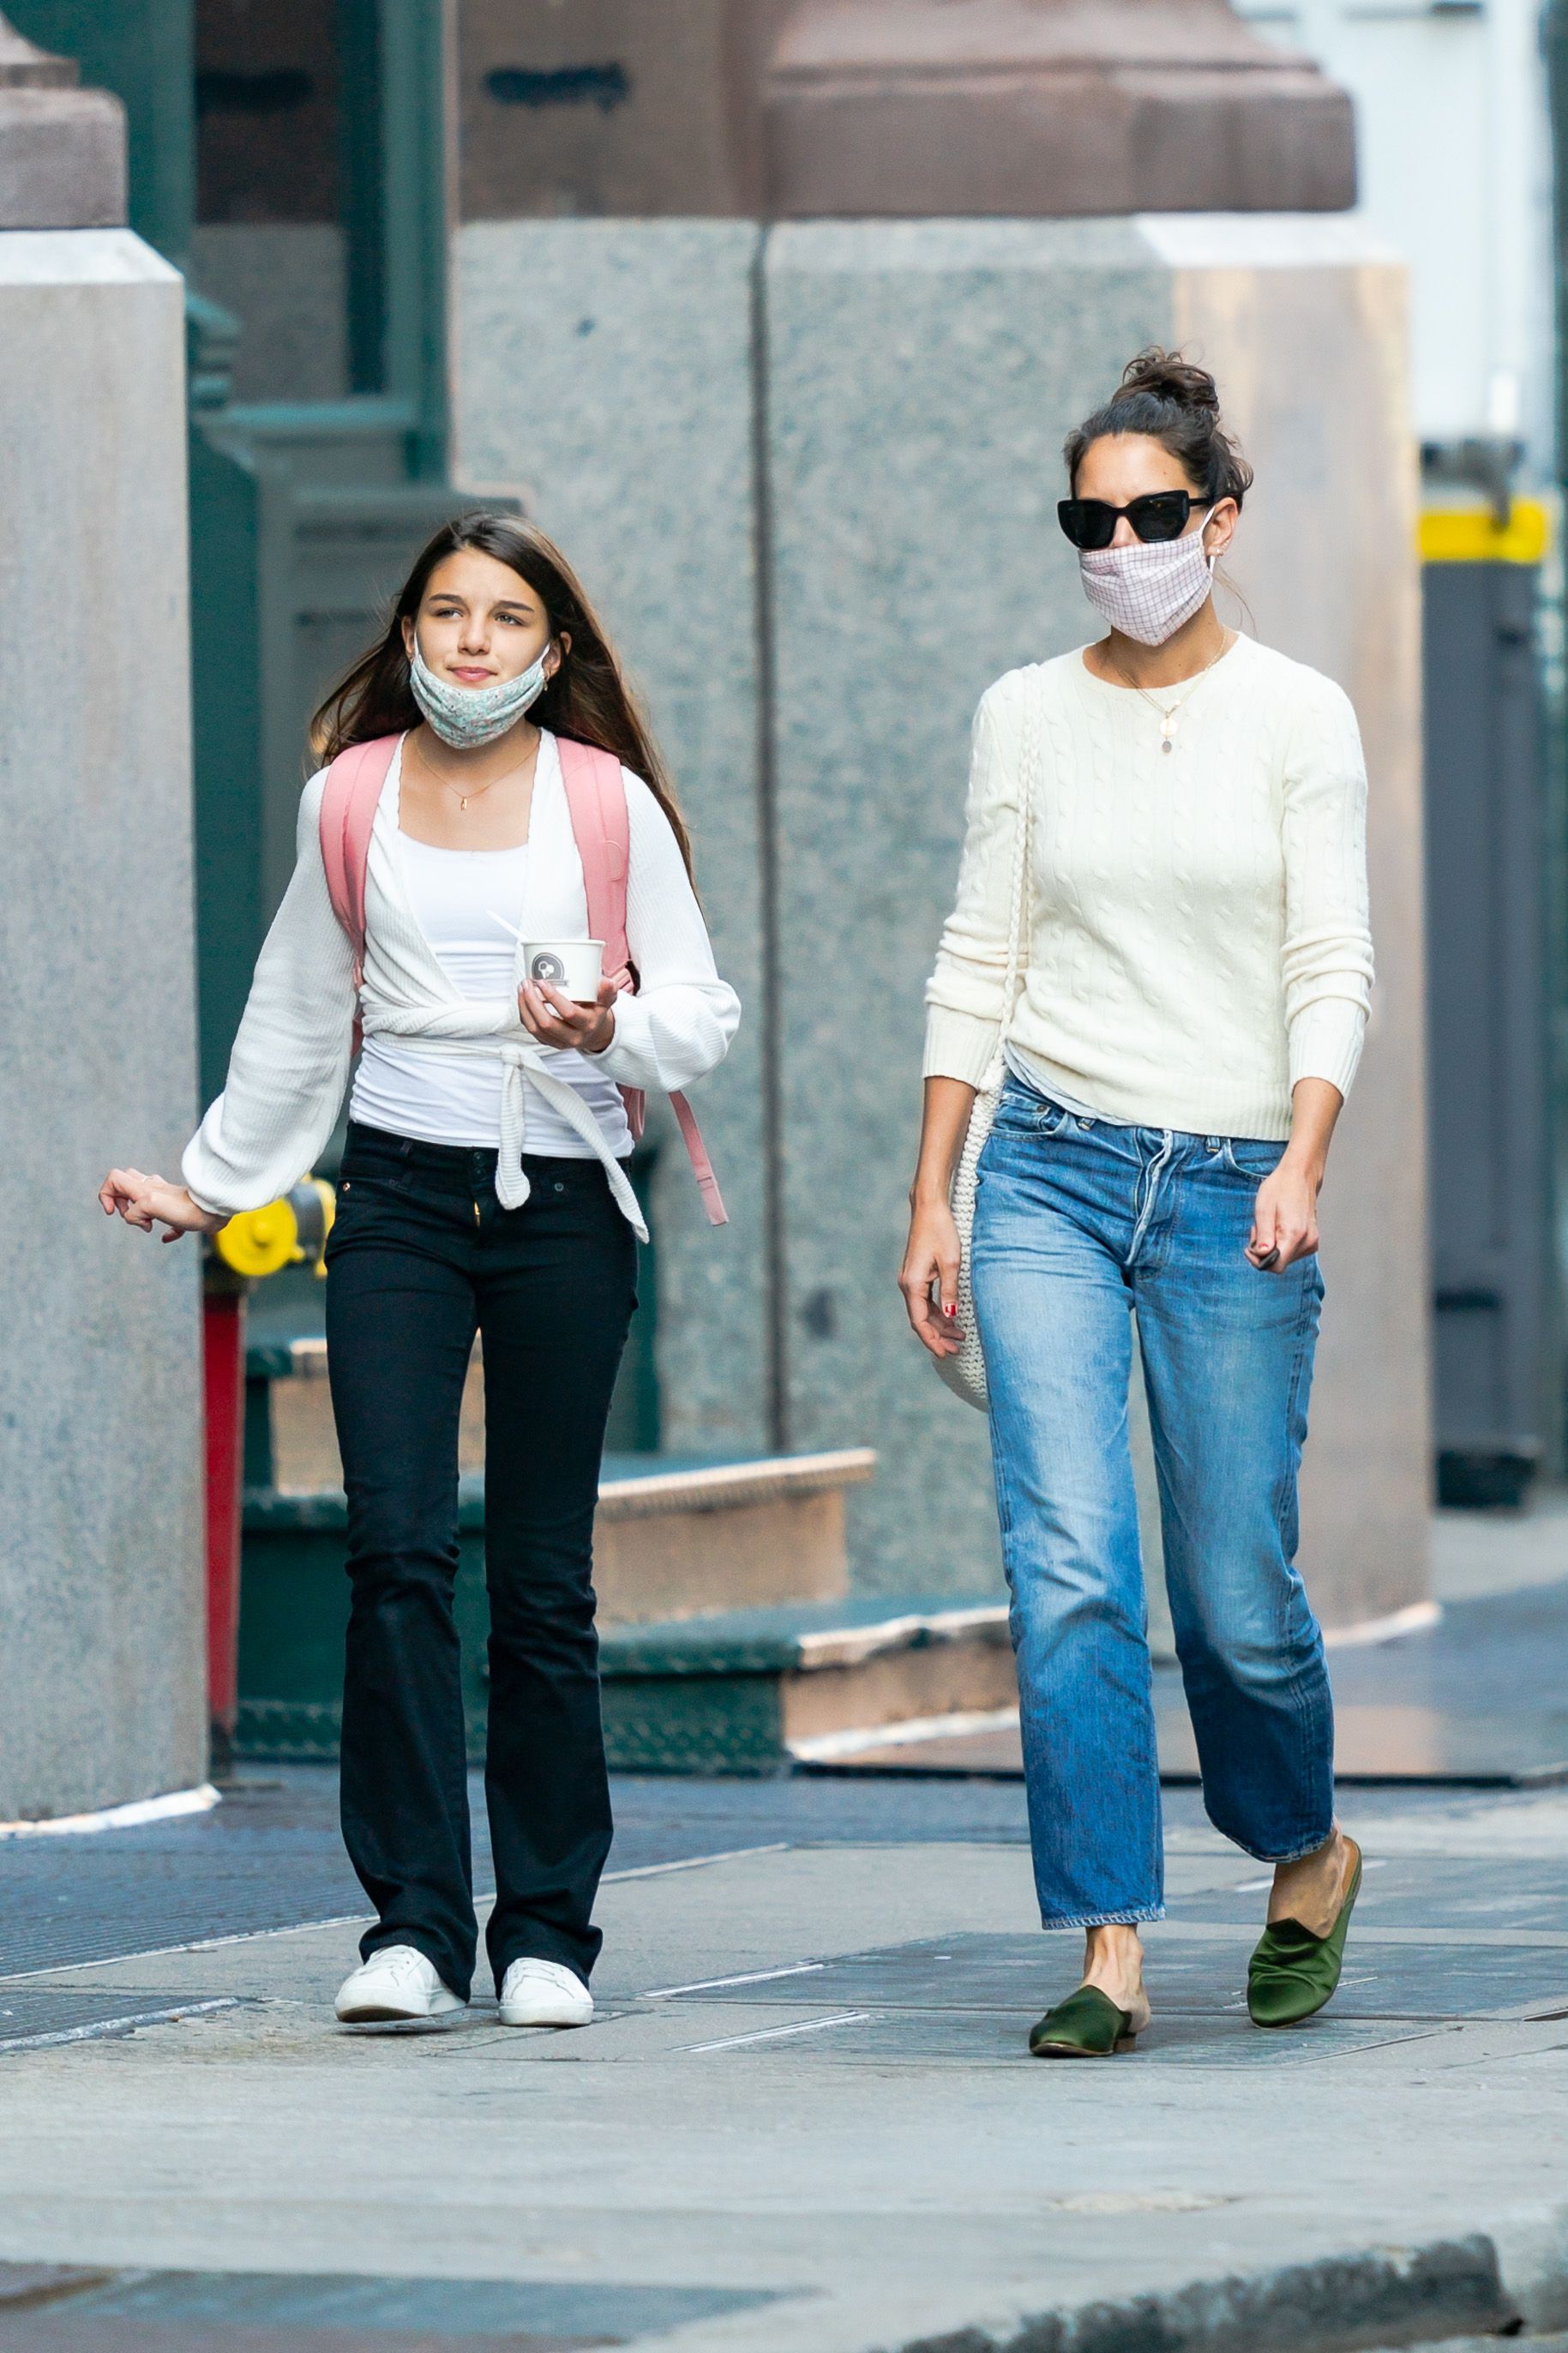 Suri Cruise and Katie Holmes are seen on September 08, 2020 in New York City. | Source: Getty Images